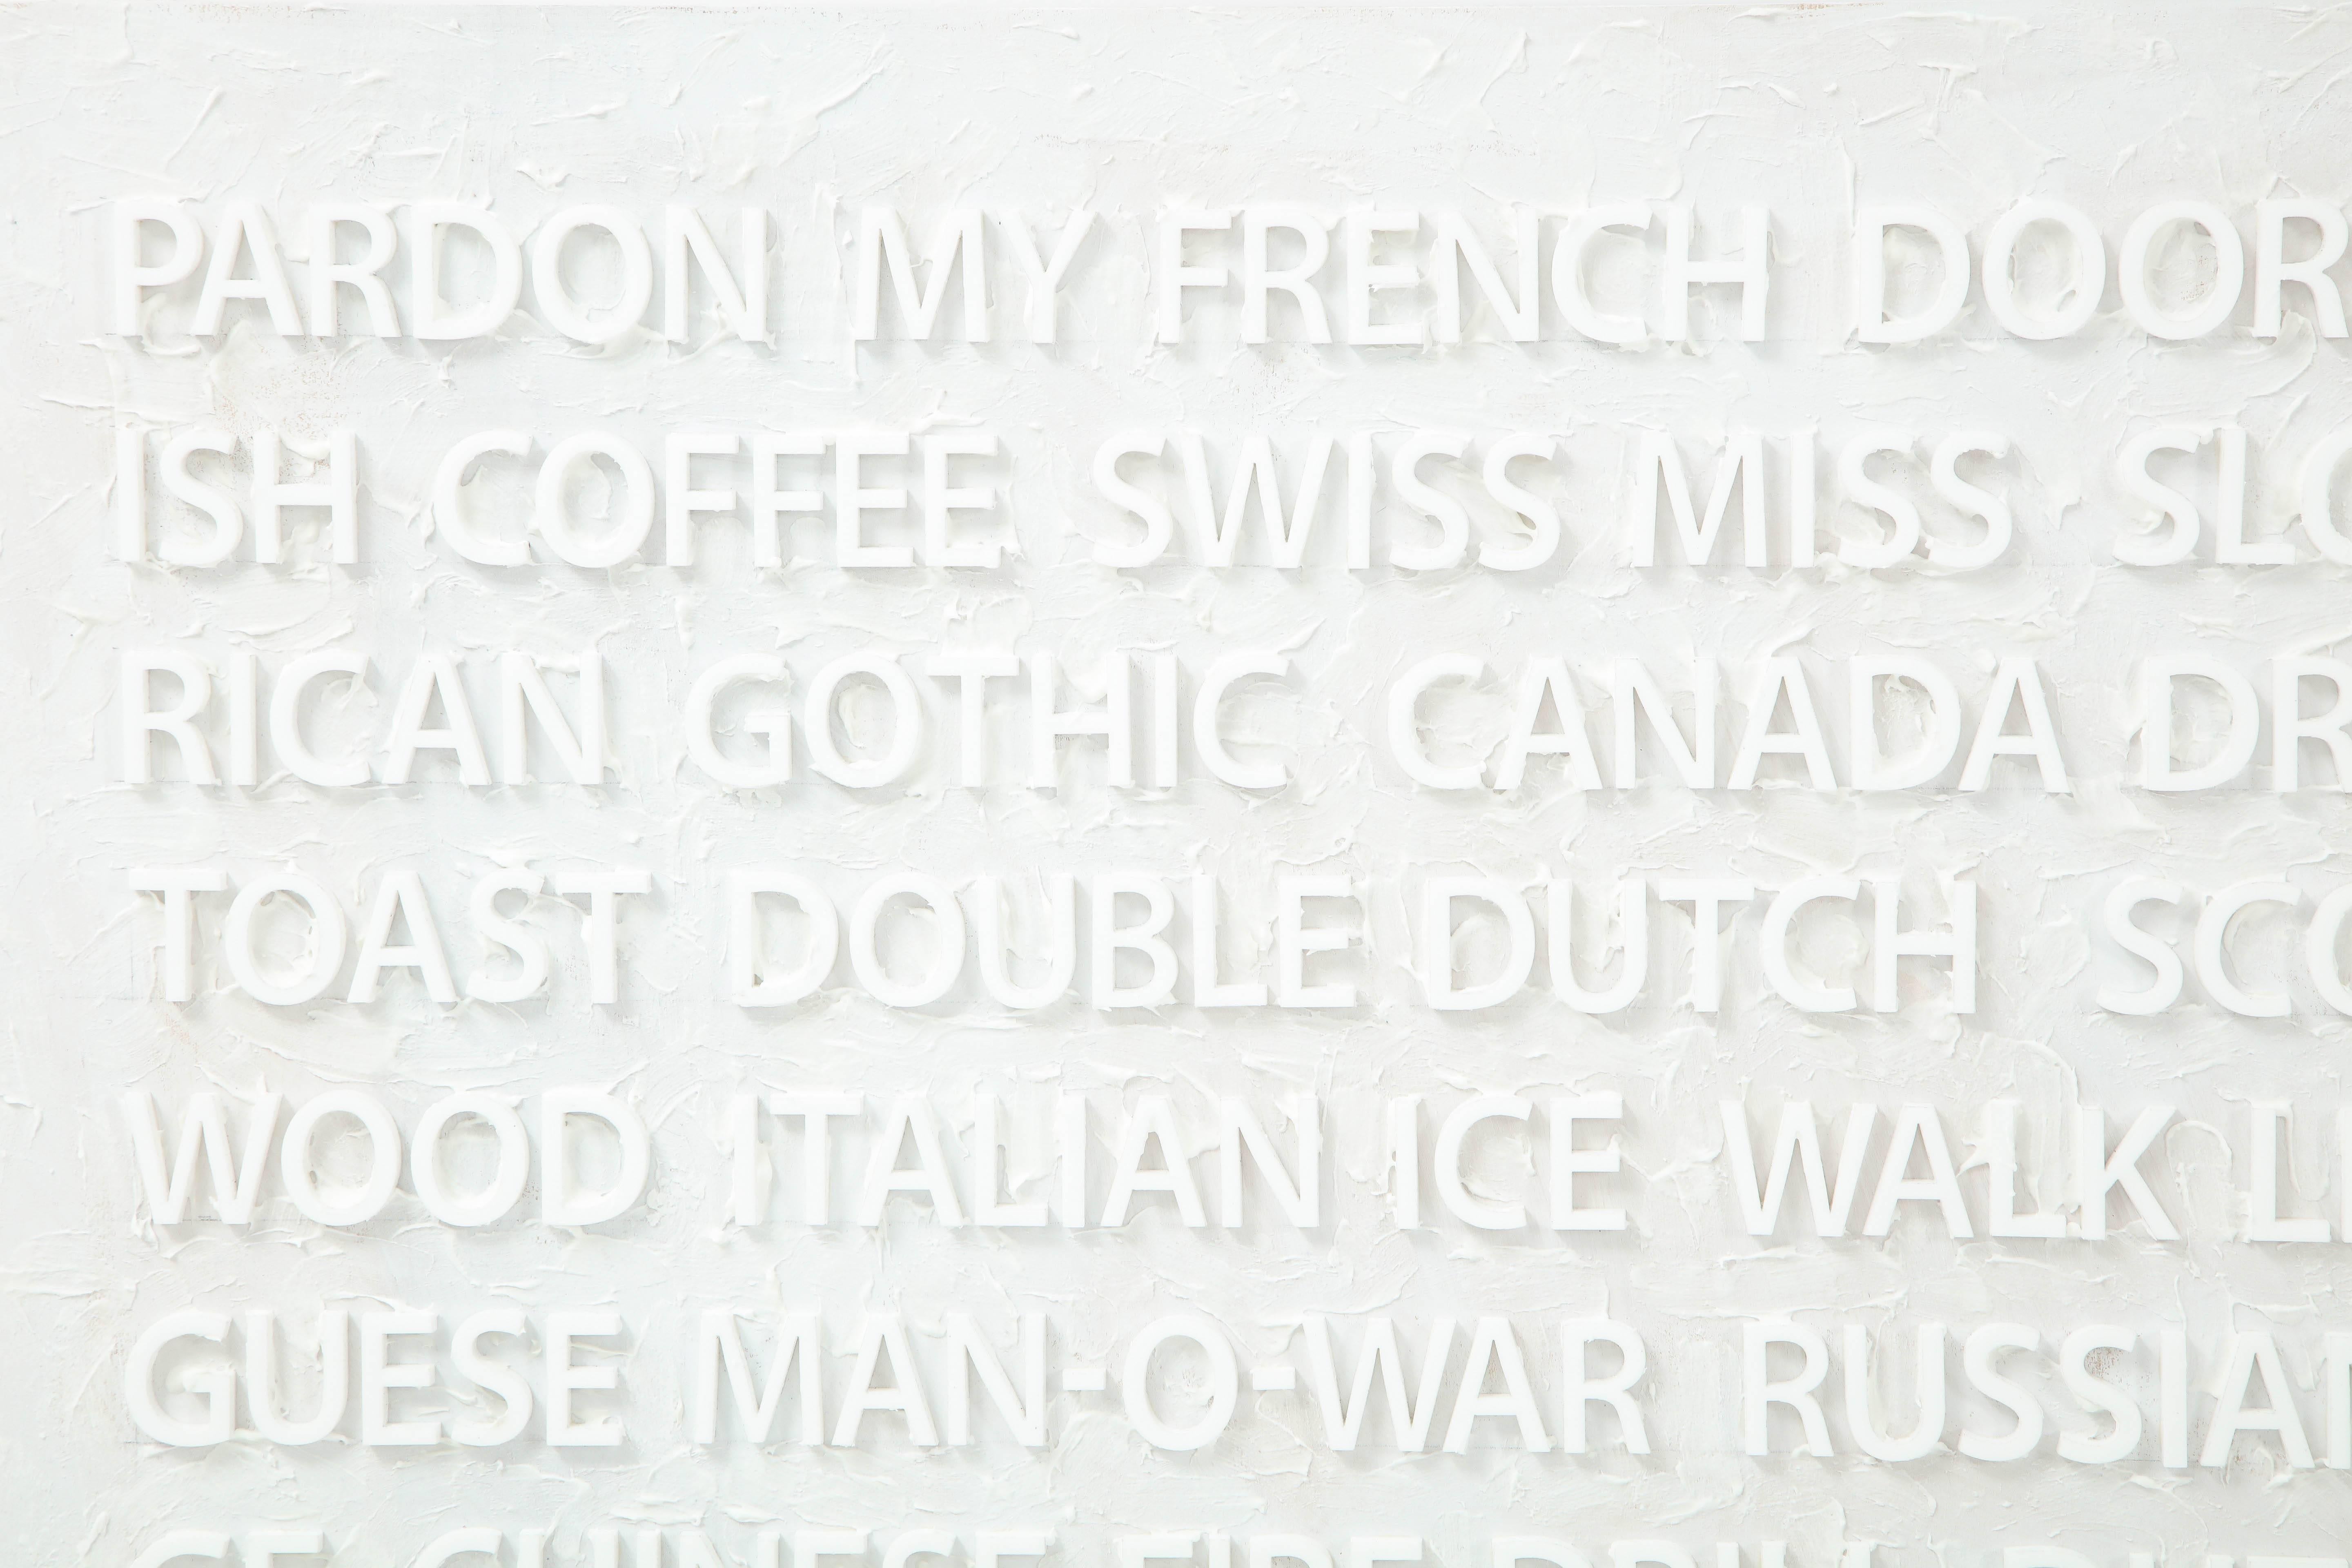 Contemporary artist Peter Buchman's Pardon My French is made of laser cut plexiglass, acrylic medium and enamel on wood. Peter's sketchbooks are filled with his writings, his notes, his verbal outbursts, his jokes, his lists of words, ideas, banter